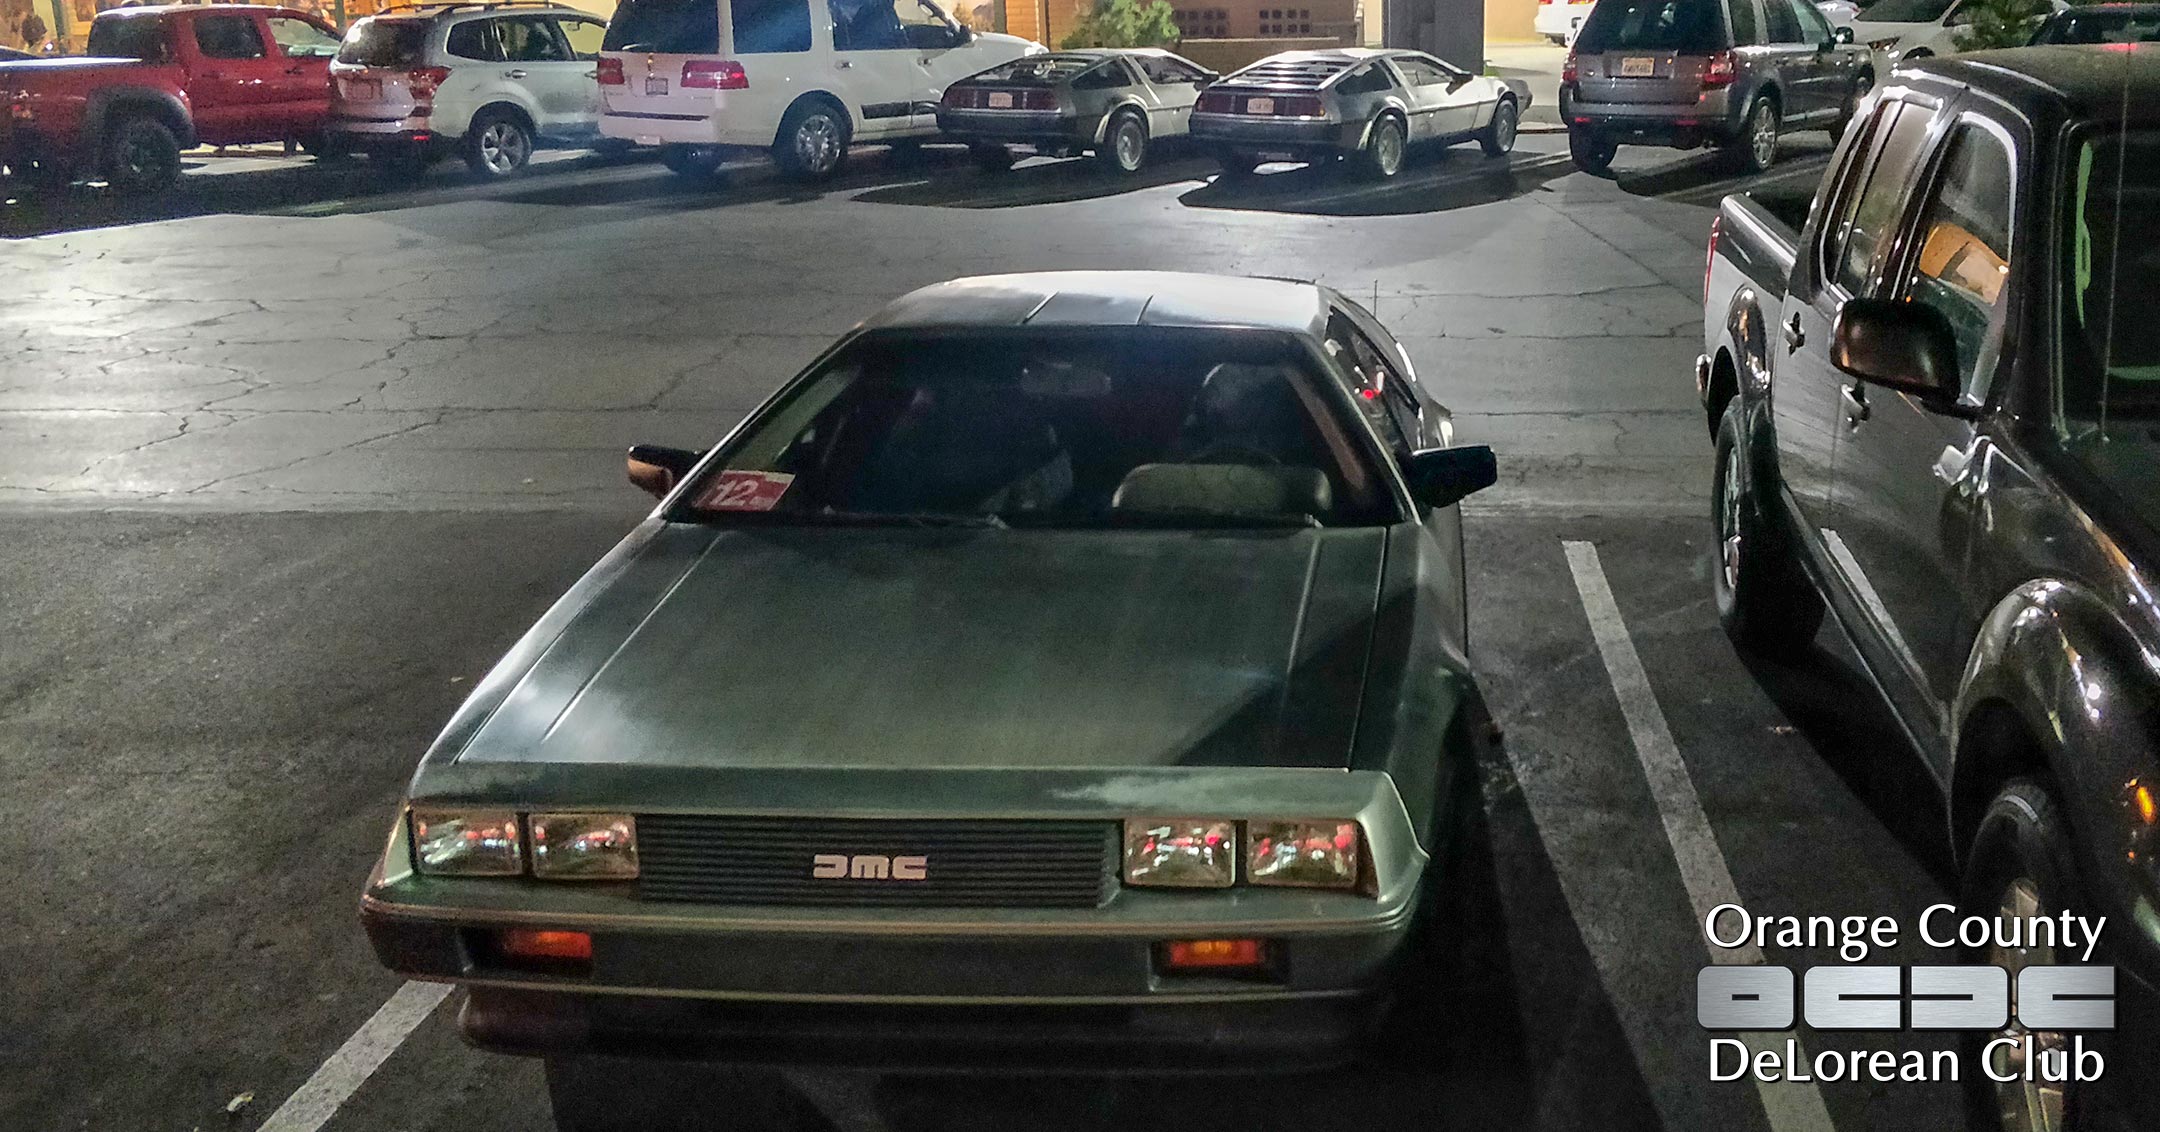 Dinner with the D's | Orange County DeLorean Club